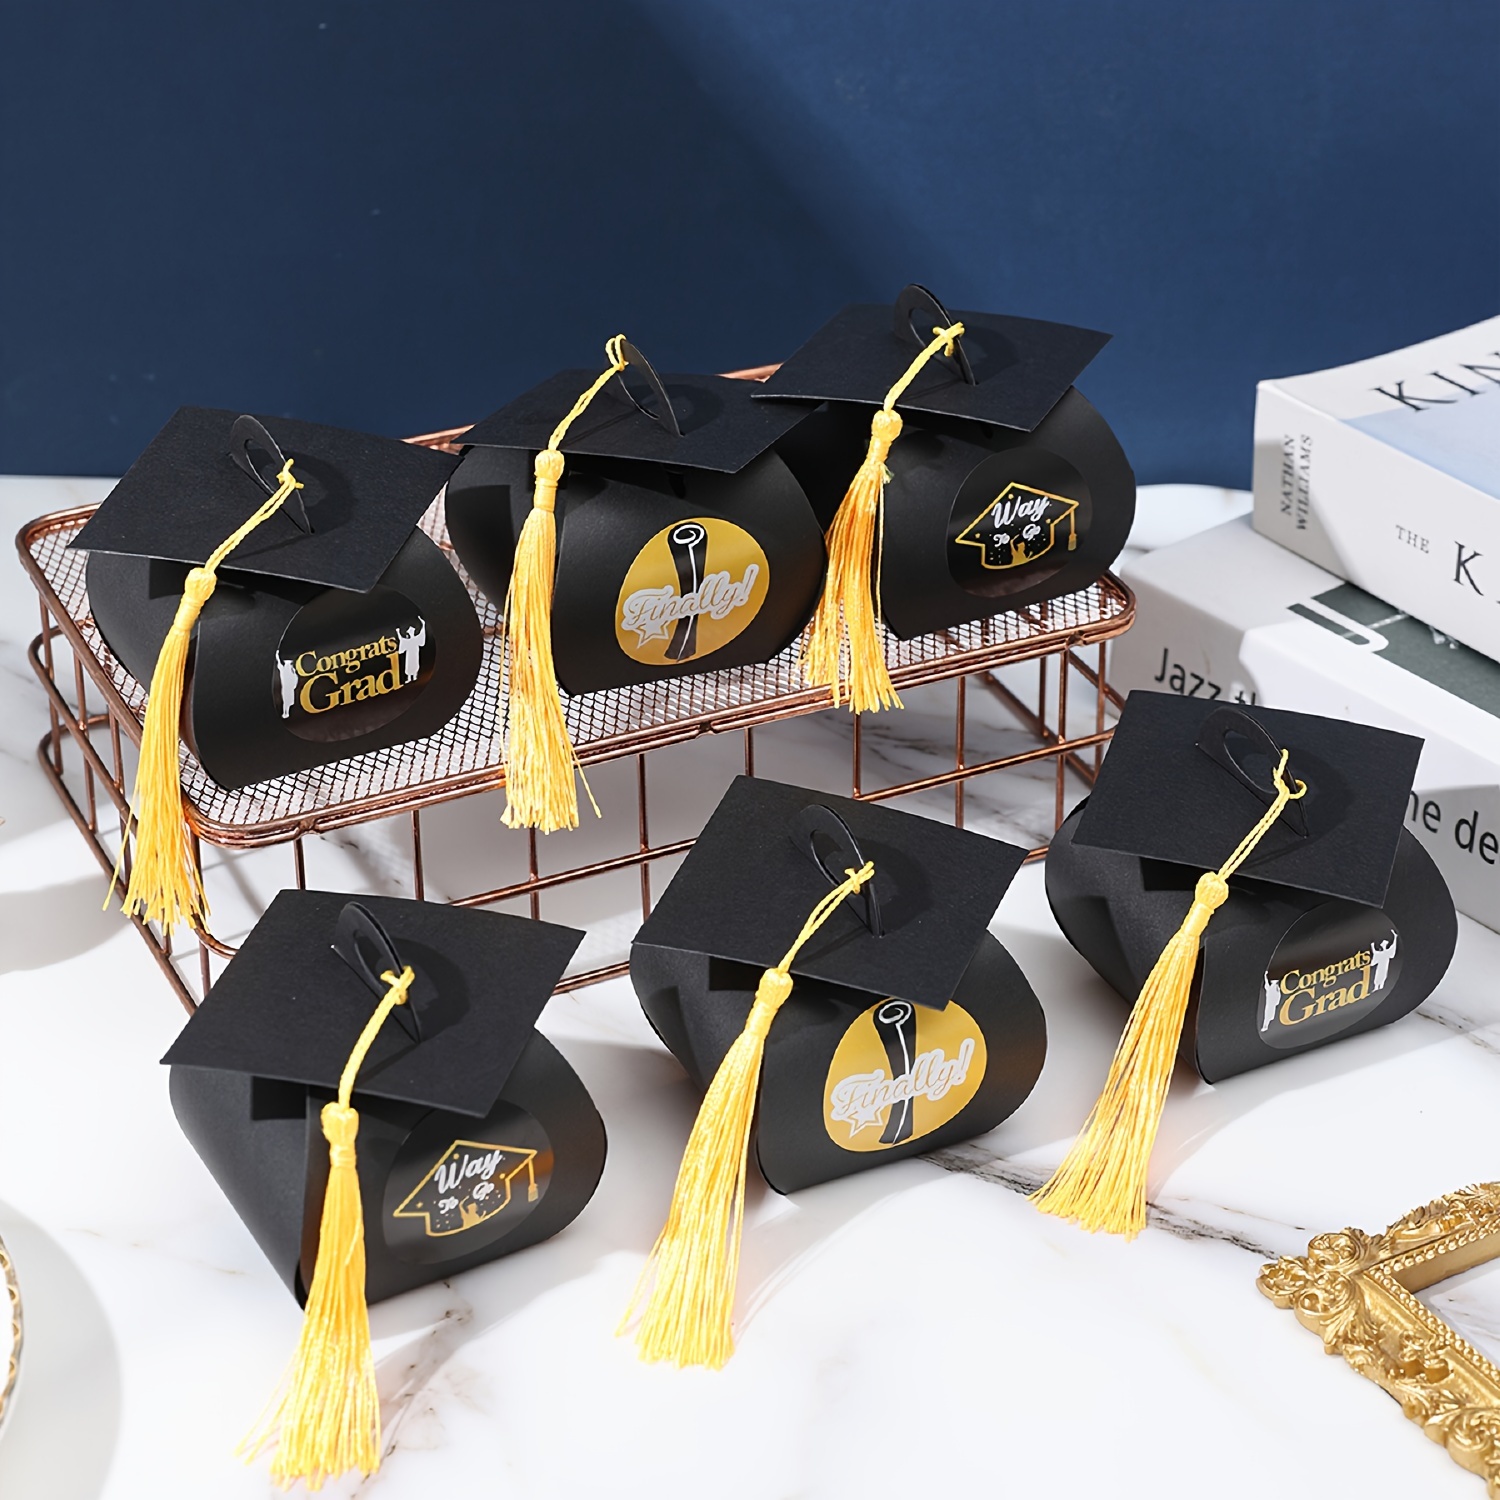 

24-piece Graduation Cap Candy Boxes With Tassels - Antique Copper Finish, Perfect For Grad Party Favors & Gifts